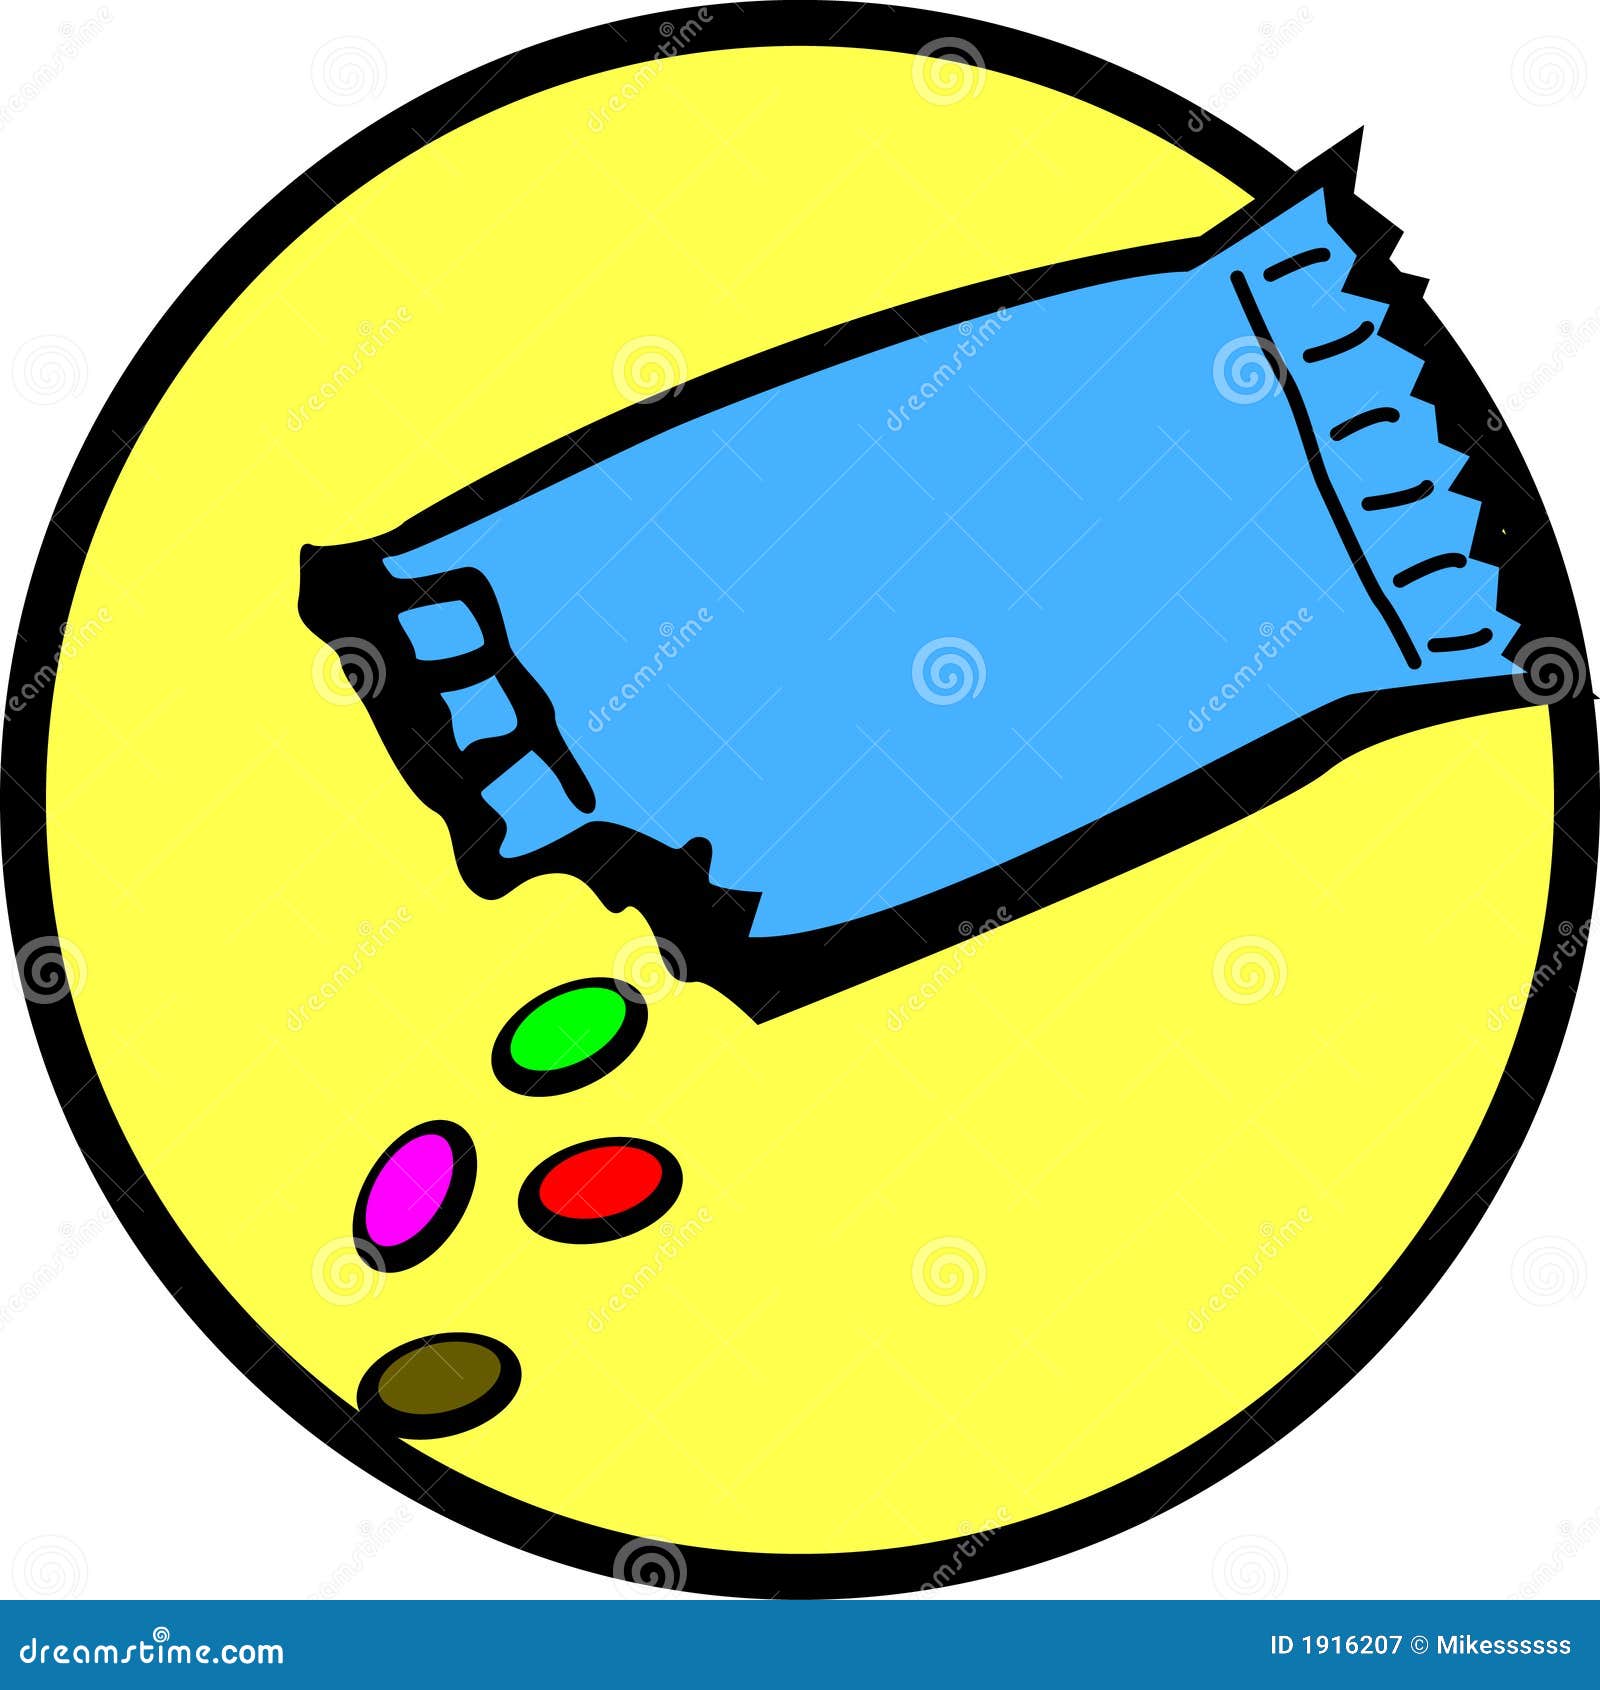 bag of candy clipart - photo #17